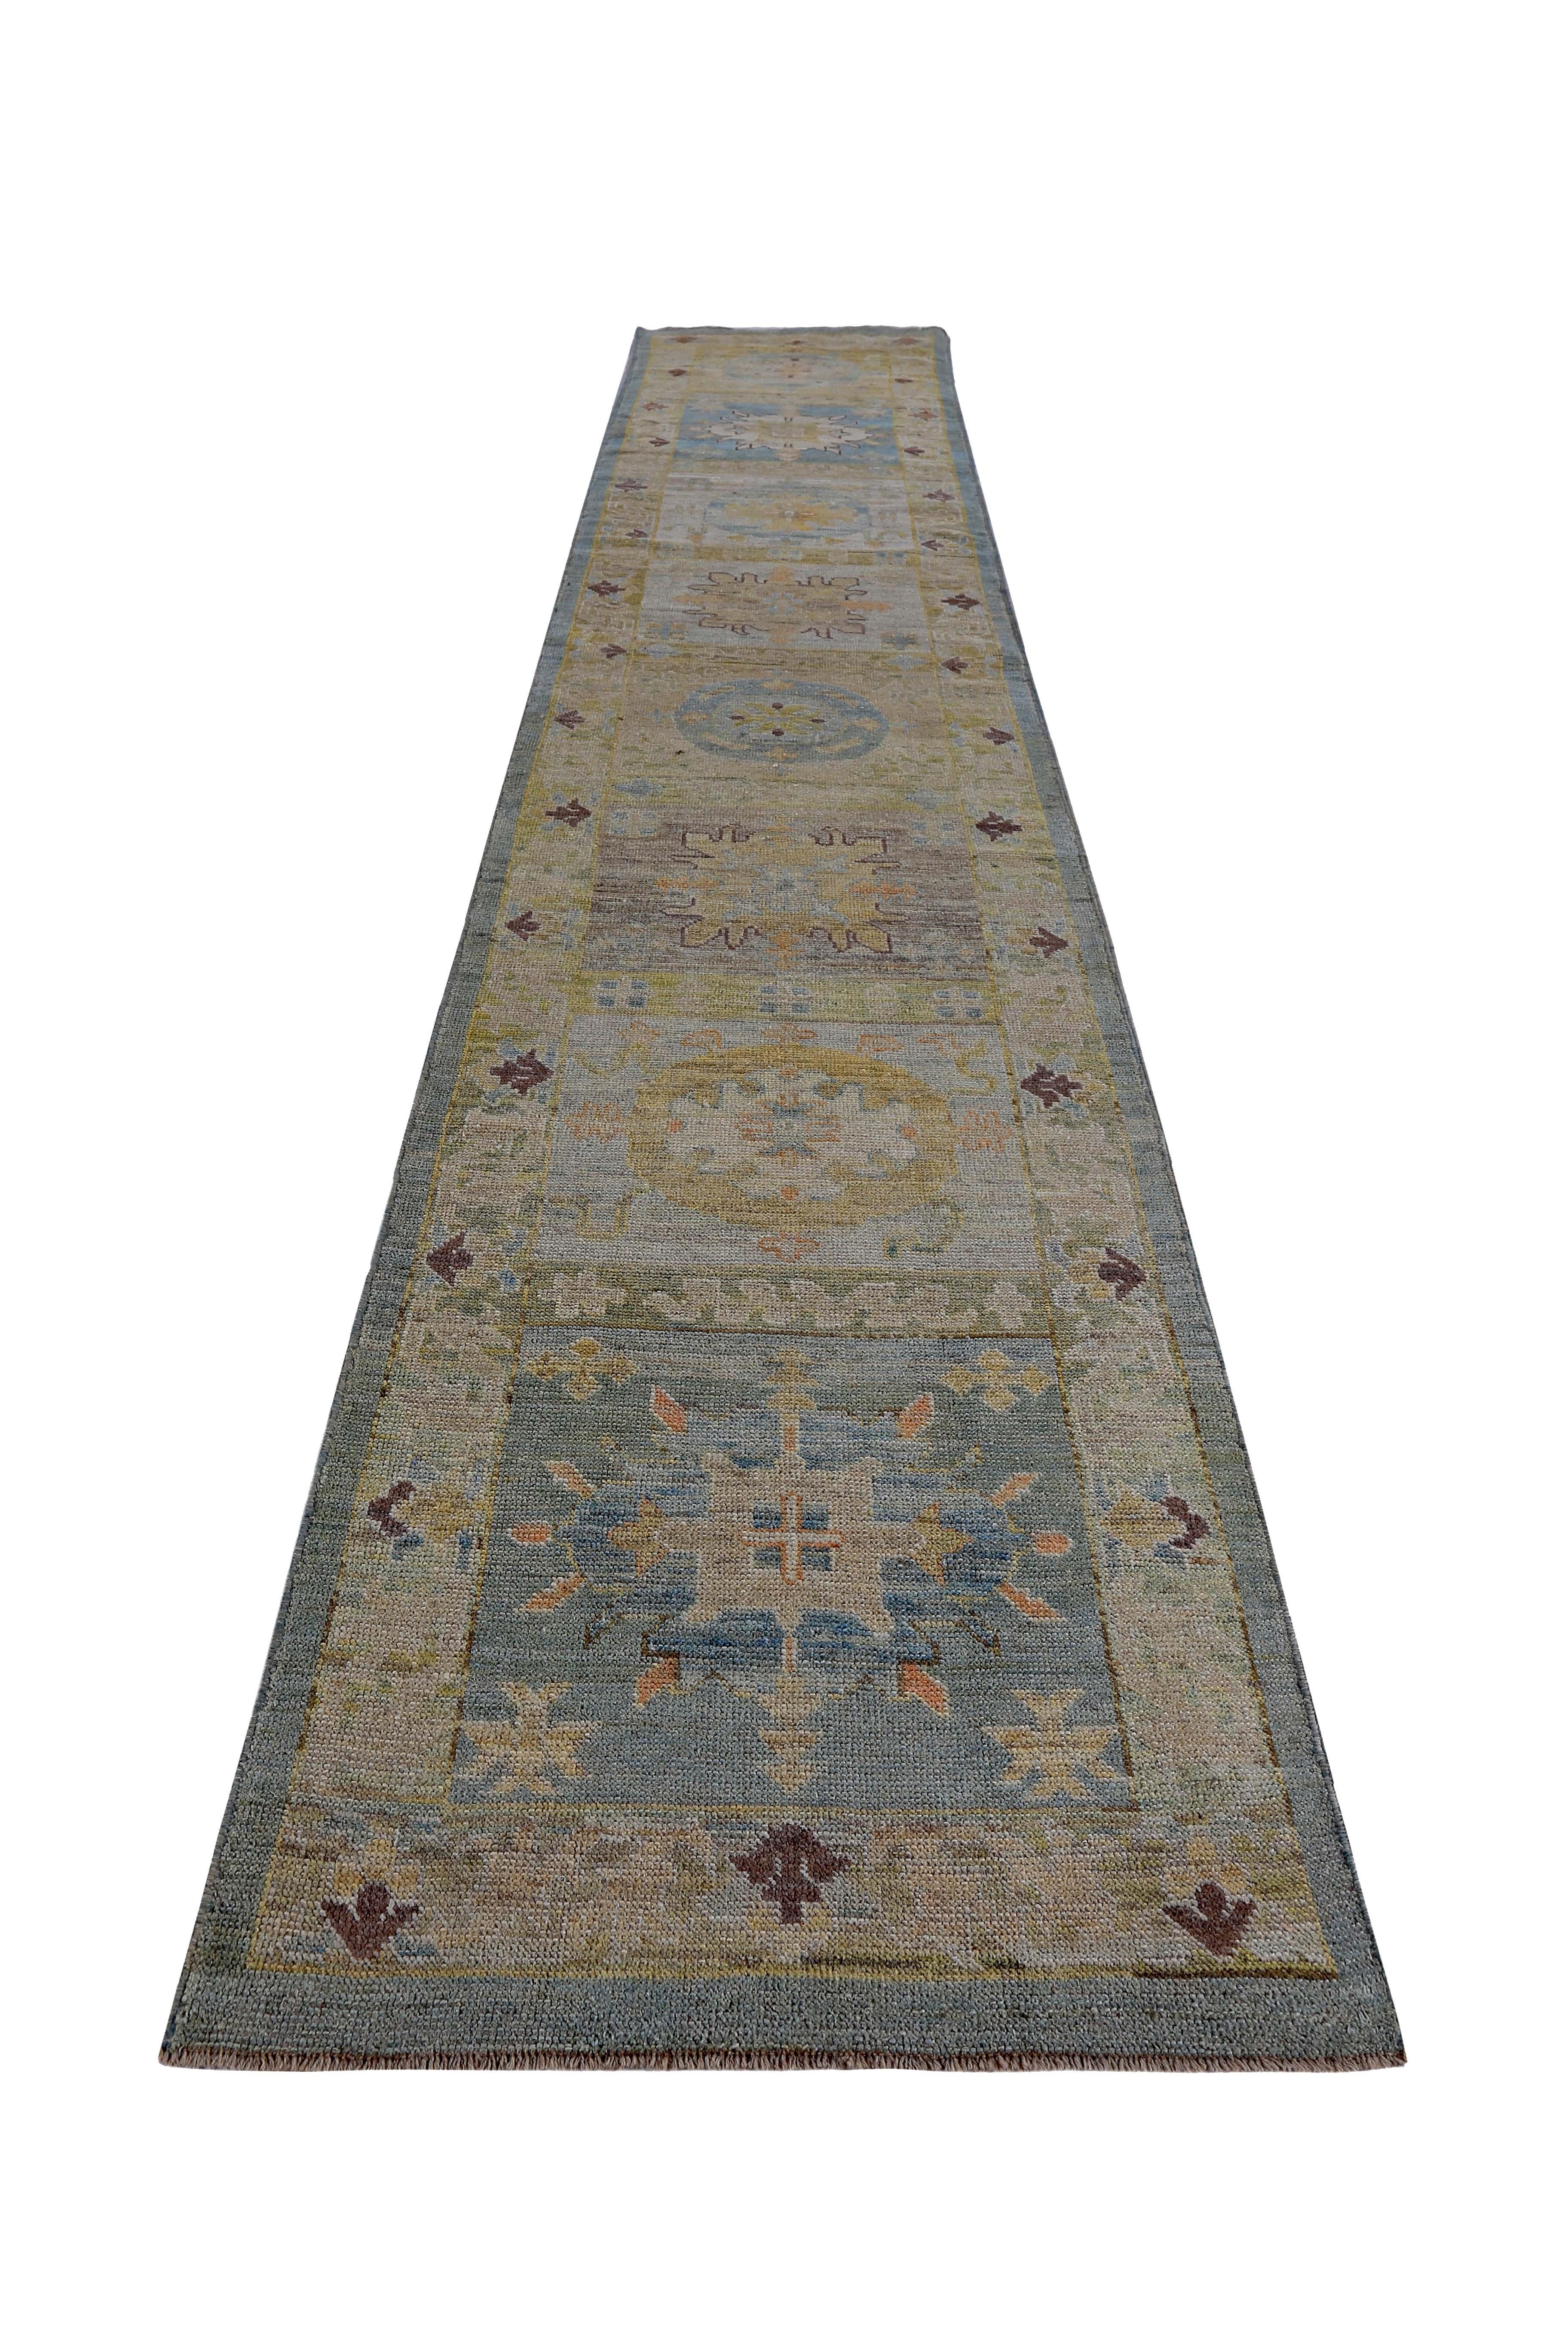 New Turkish runner rug made of handwoven sheep’s wool of the finest quality. It’s colored with organic vegetable dyes that are certified safe for humans and pets alike. It features floral details in blue, yellow and green over a brown field. Flower